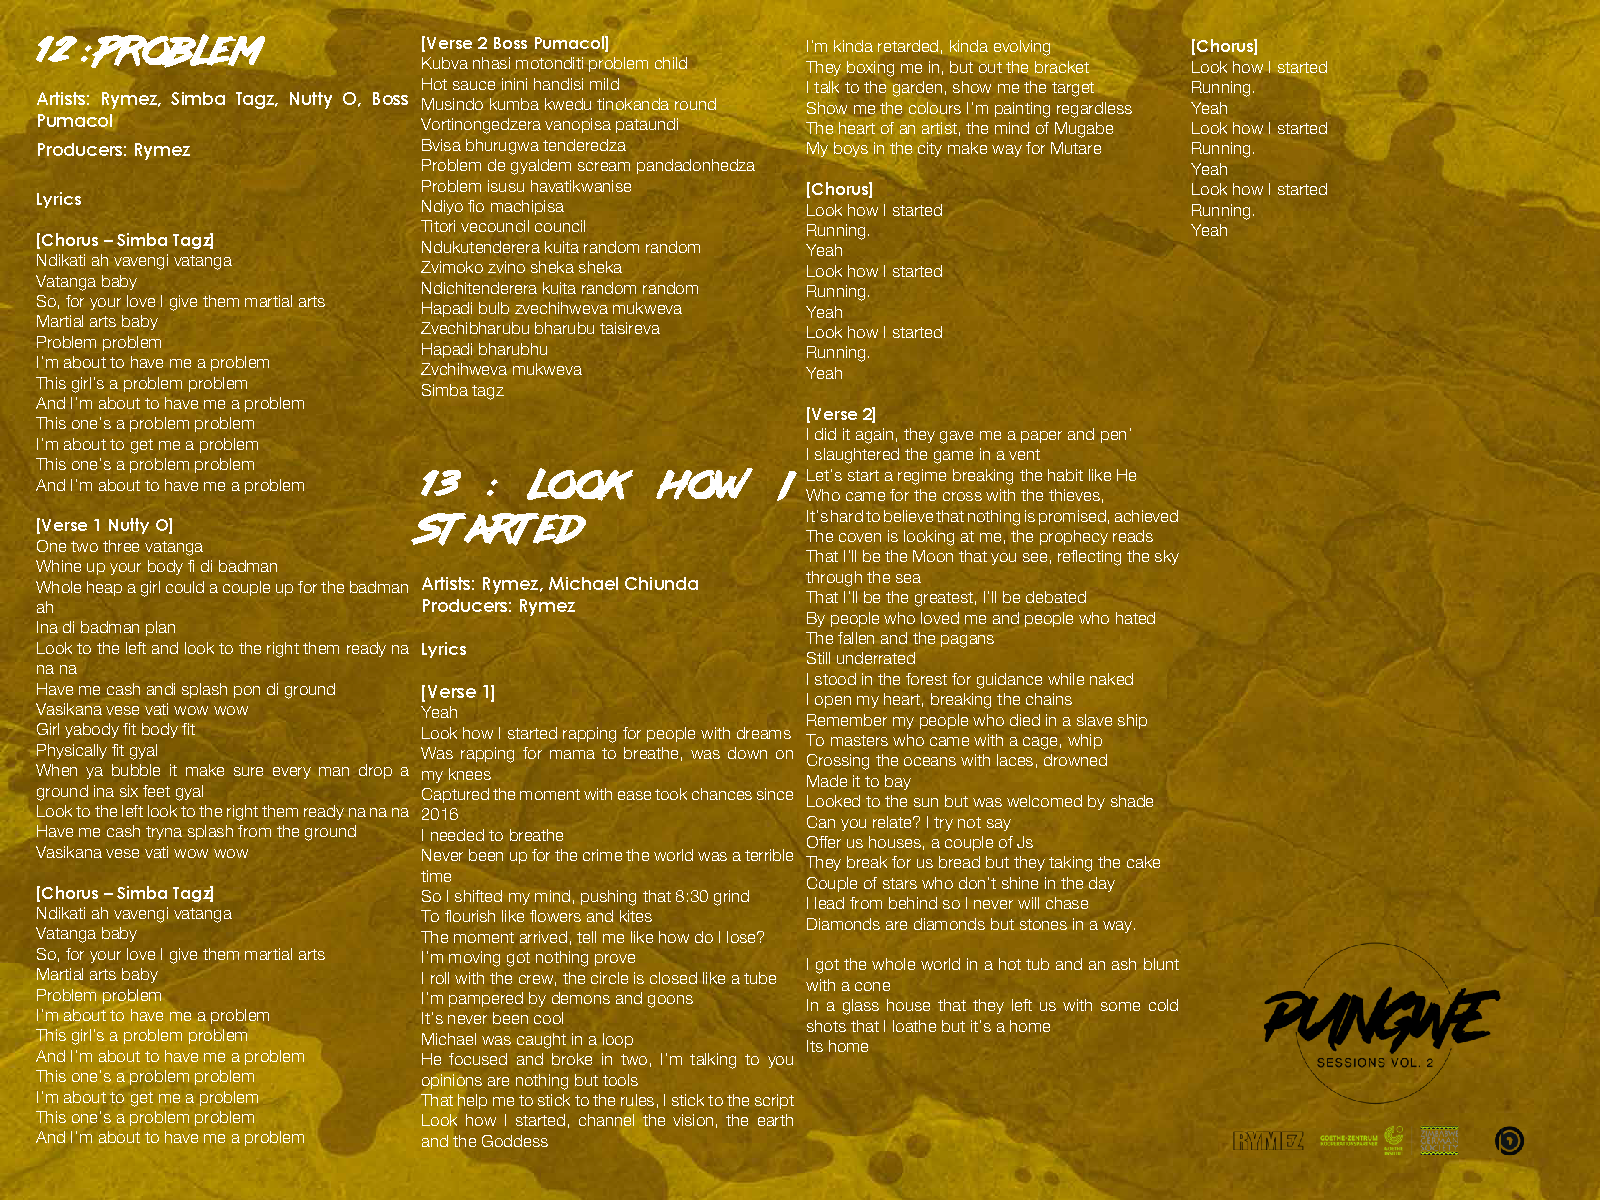 Pungwe Sessions Vol II Booklet_Page_7.png